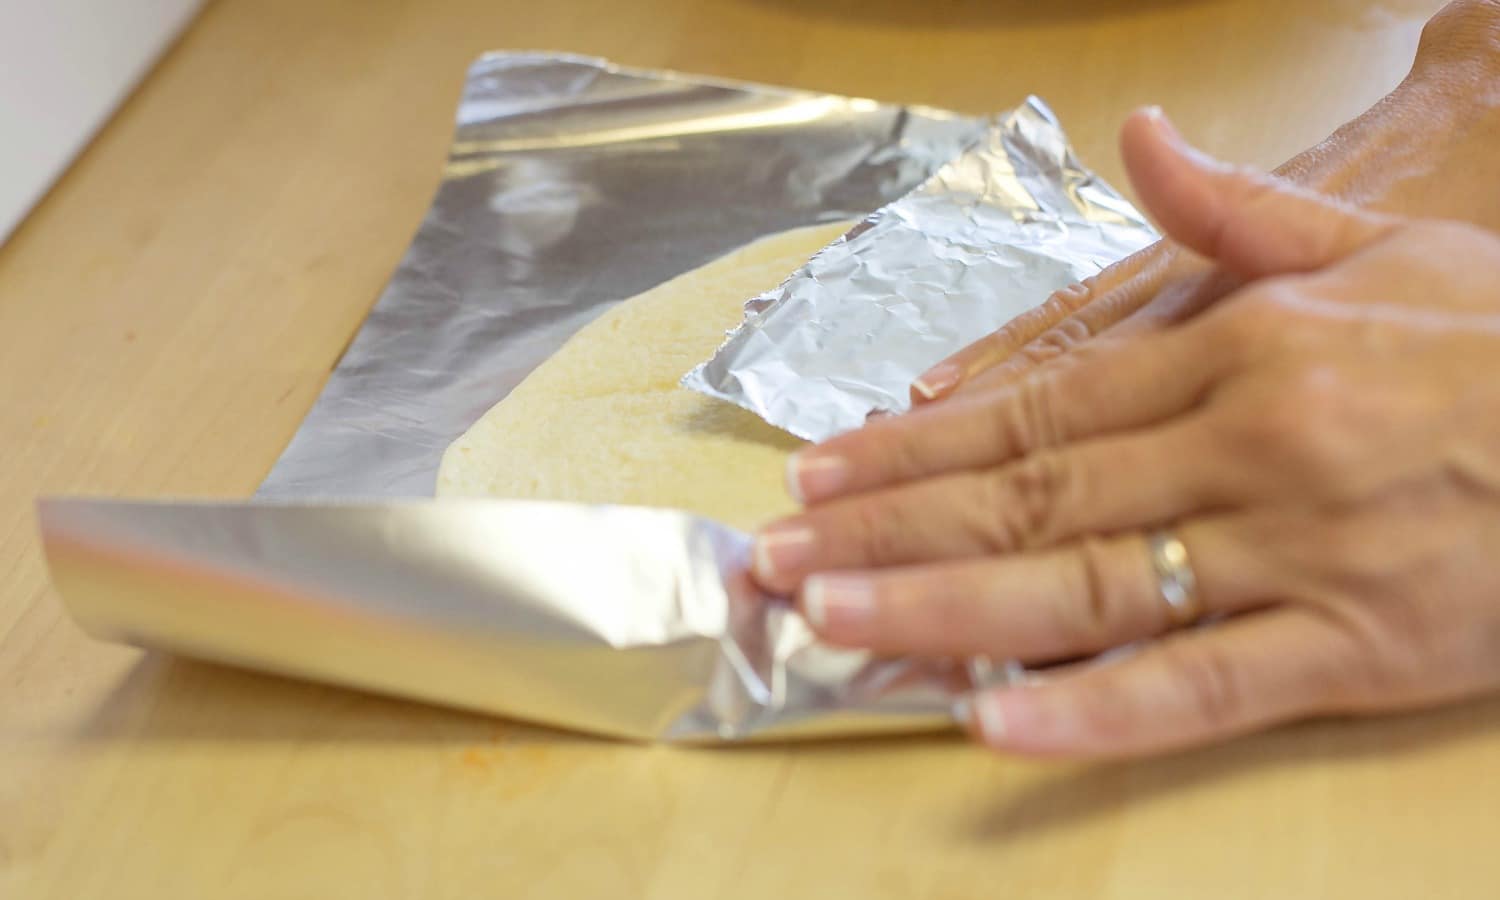 Heat the tortillas in the oven for 5 minutes to soften